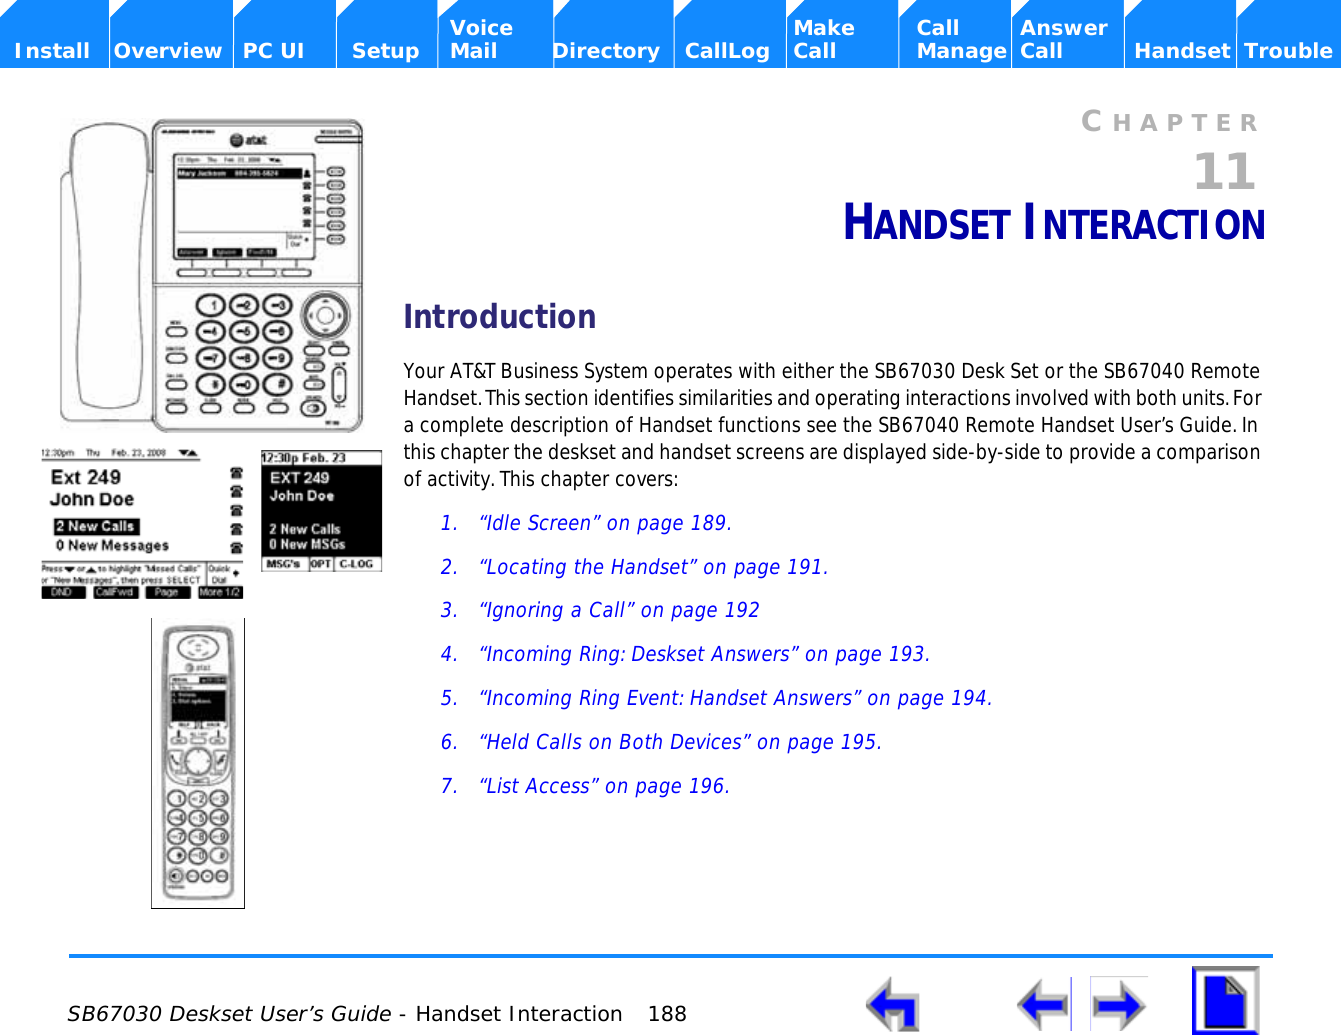  SB67030 Deskset User’s Guide - Handset Interaction 188    Voice Make Call Answer  Install Overview PC UI Setup Mail Directory CallLog Call Manage Call Handset TroubleCHAPTER11HANDSET INTERACTIONIntroductionYour AT&amp;T Business System operates with either the SB67030 Desk Set or the SB67040 Remote Handset. This section identifies similarities and operating interactions involved with both units. For a complete description of Handset functions see the SB67040 Remote Handset User’s Guide. In this chapter the deskset and handset screens are displayed side-by-side to provide a comparison of activity. This chapter covers:1. “Idle Screen” on page 189.2. “Locating the Handset” on page 191.3. “Ignoring a Call” on page 1924. “Incoming Ring: Deskset Answers” on page 193.5. “Incoming Ring Event: Handset Answers” on page 194.6. “Held Calls on Both Devices” on page 195.7. “List Access” on page 196.